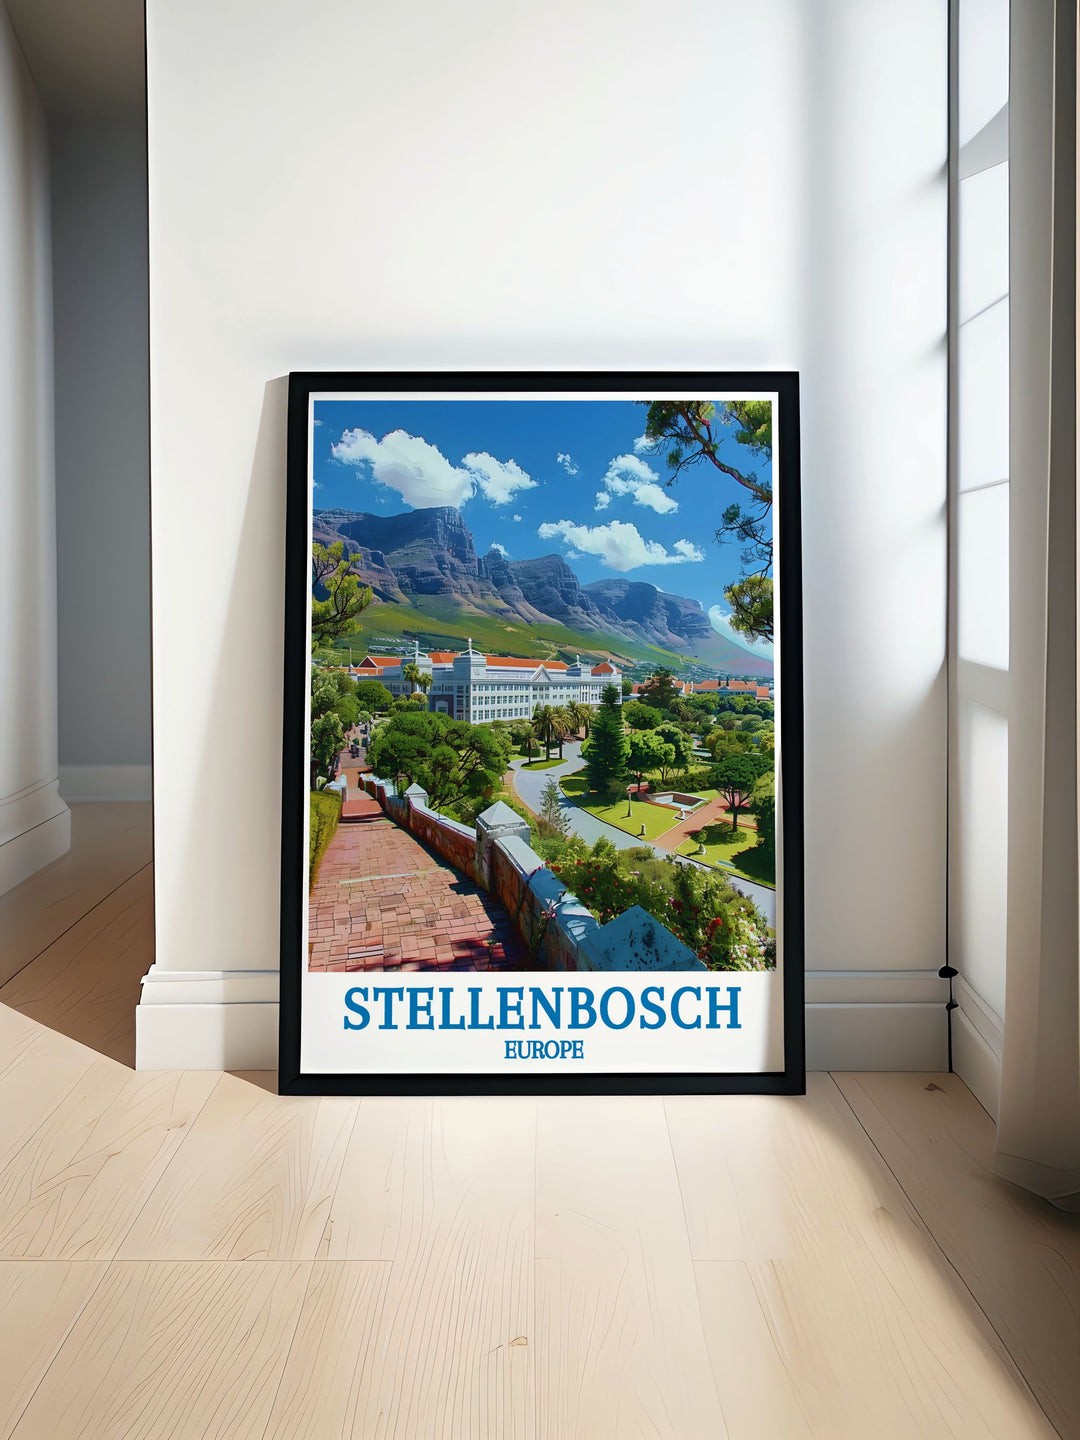 Capture the essence of Stellenboschs academic heritage with this art print, featuring the elegant campus and its scholarly ambiance.